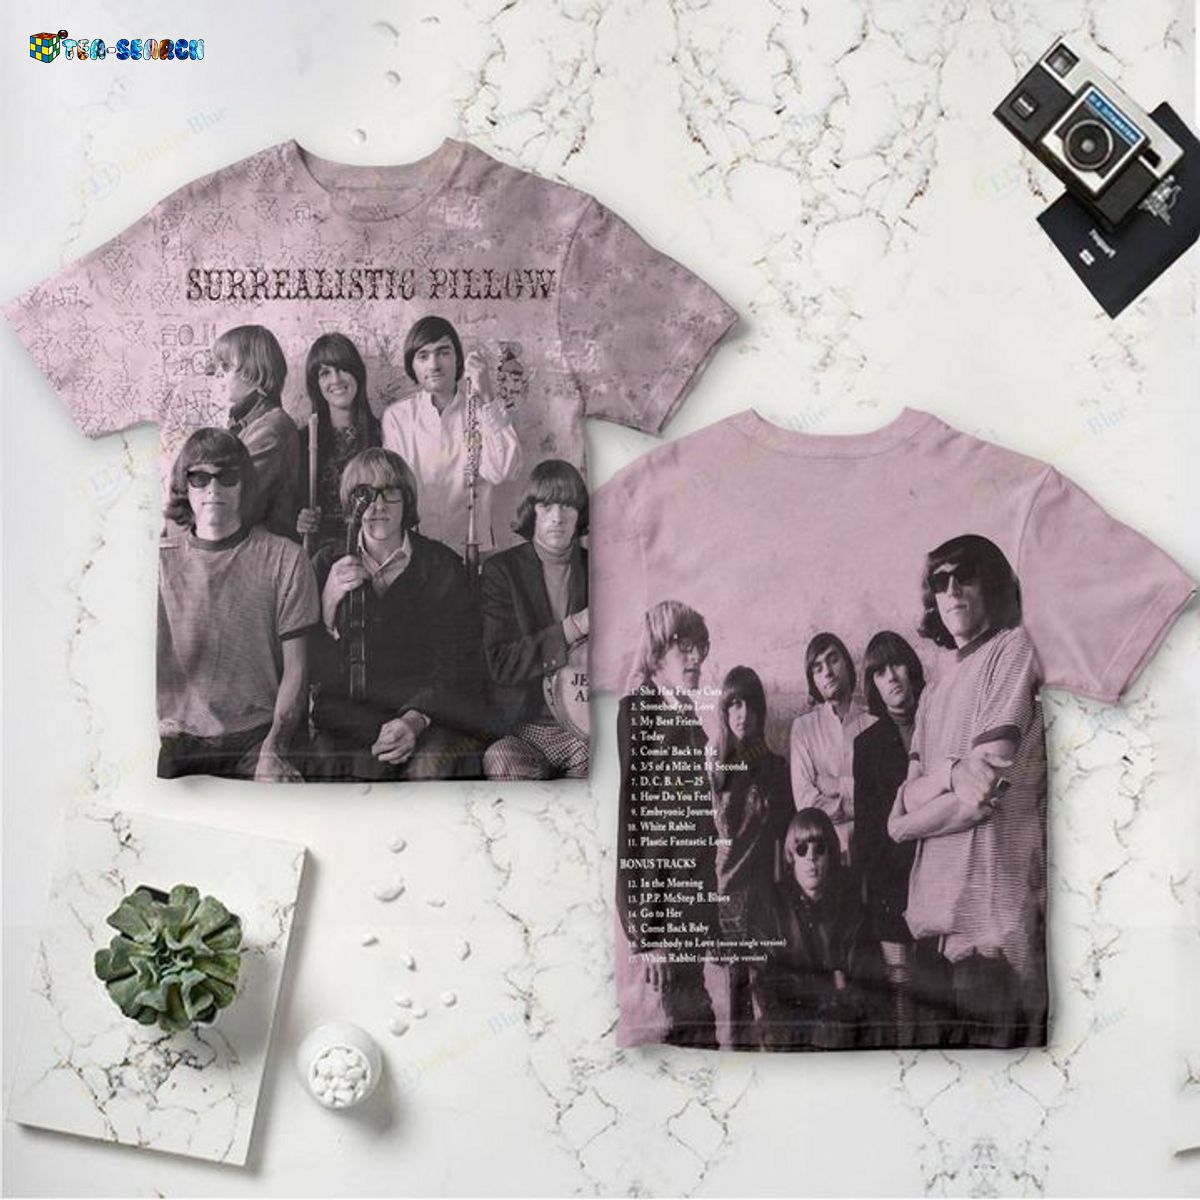 Here’s Jefferson Airplane Surrealistic Pillow All Over Print Shirt